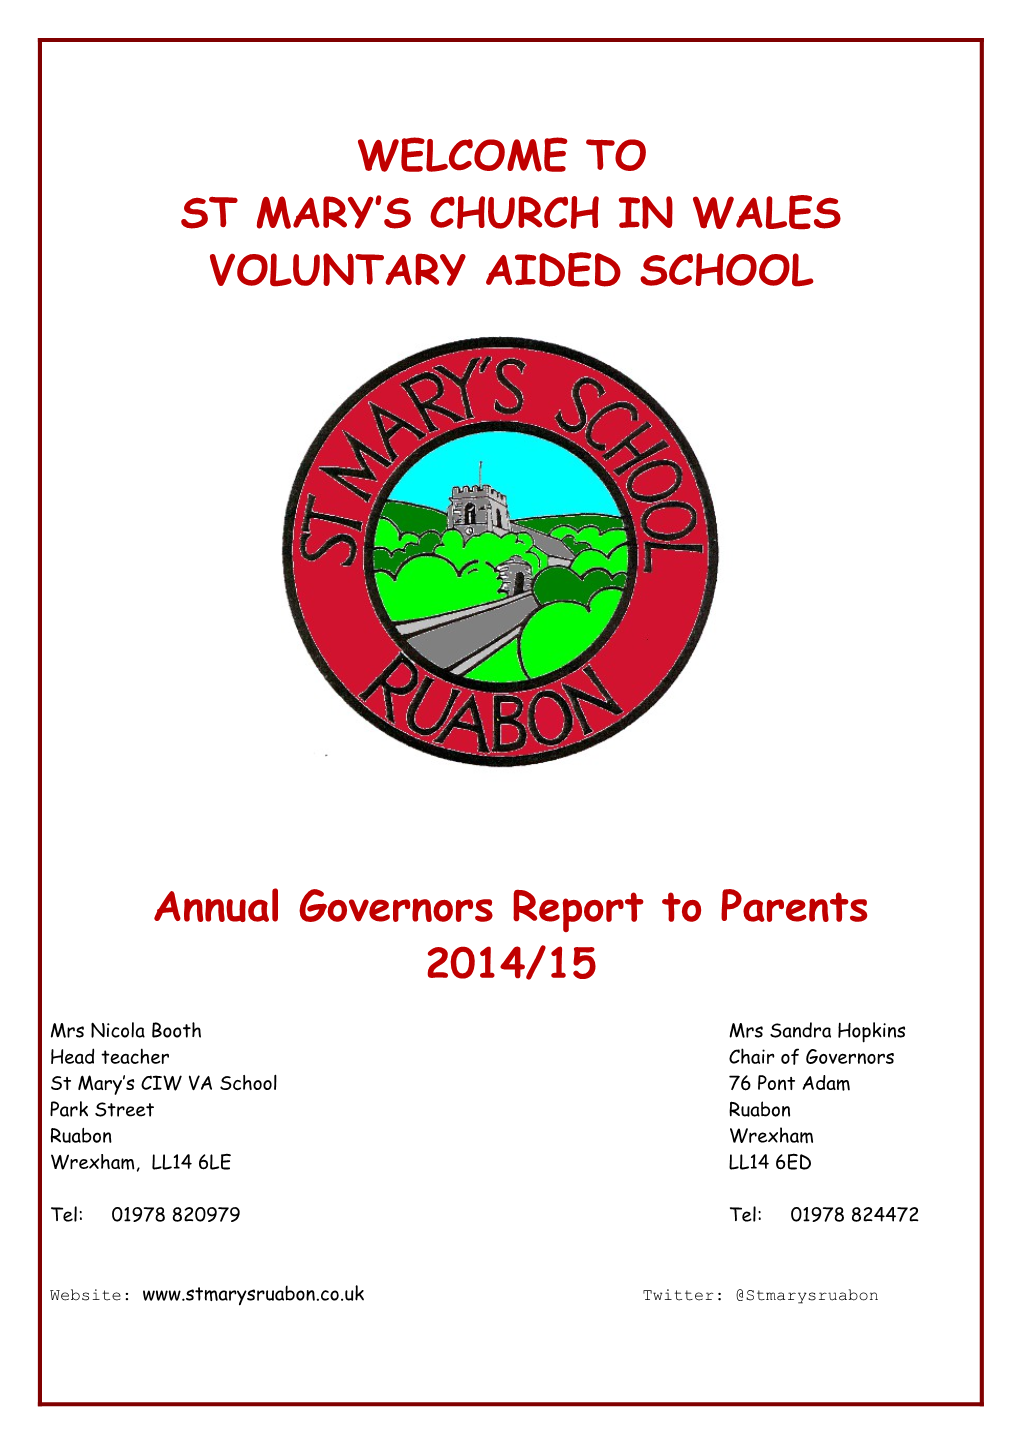 Annual Governors Report to Parents